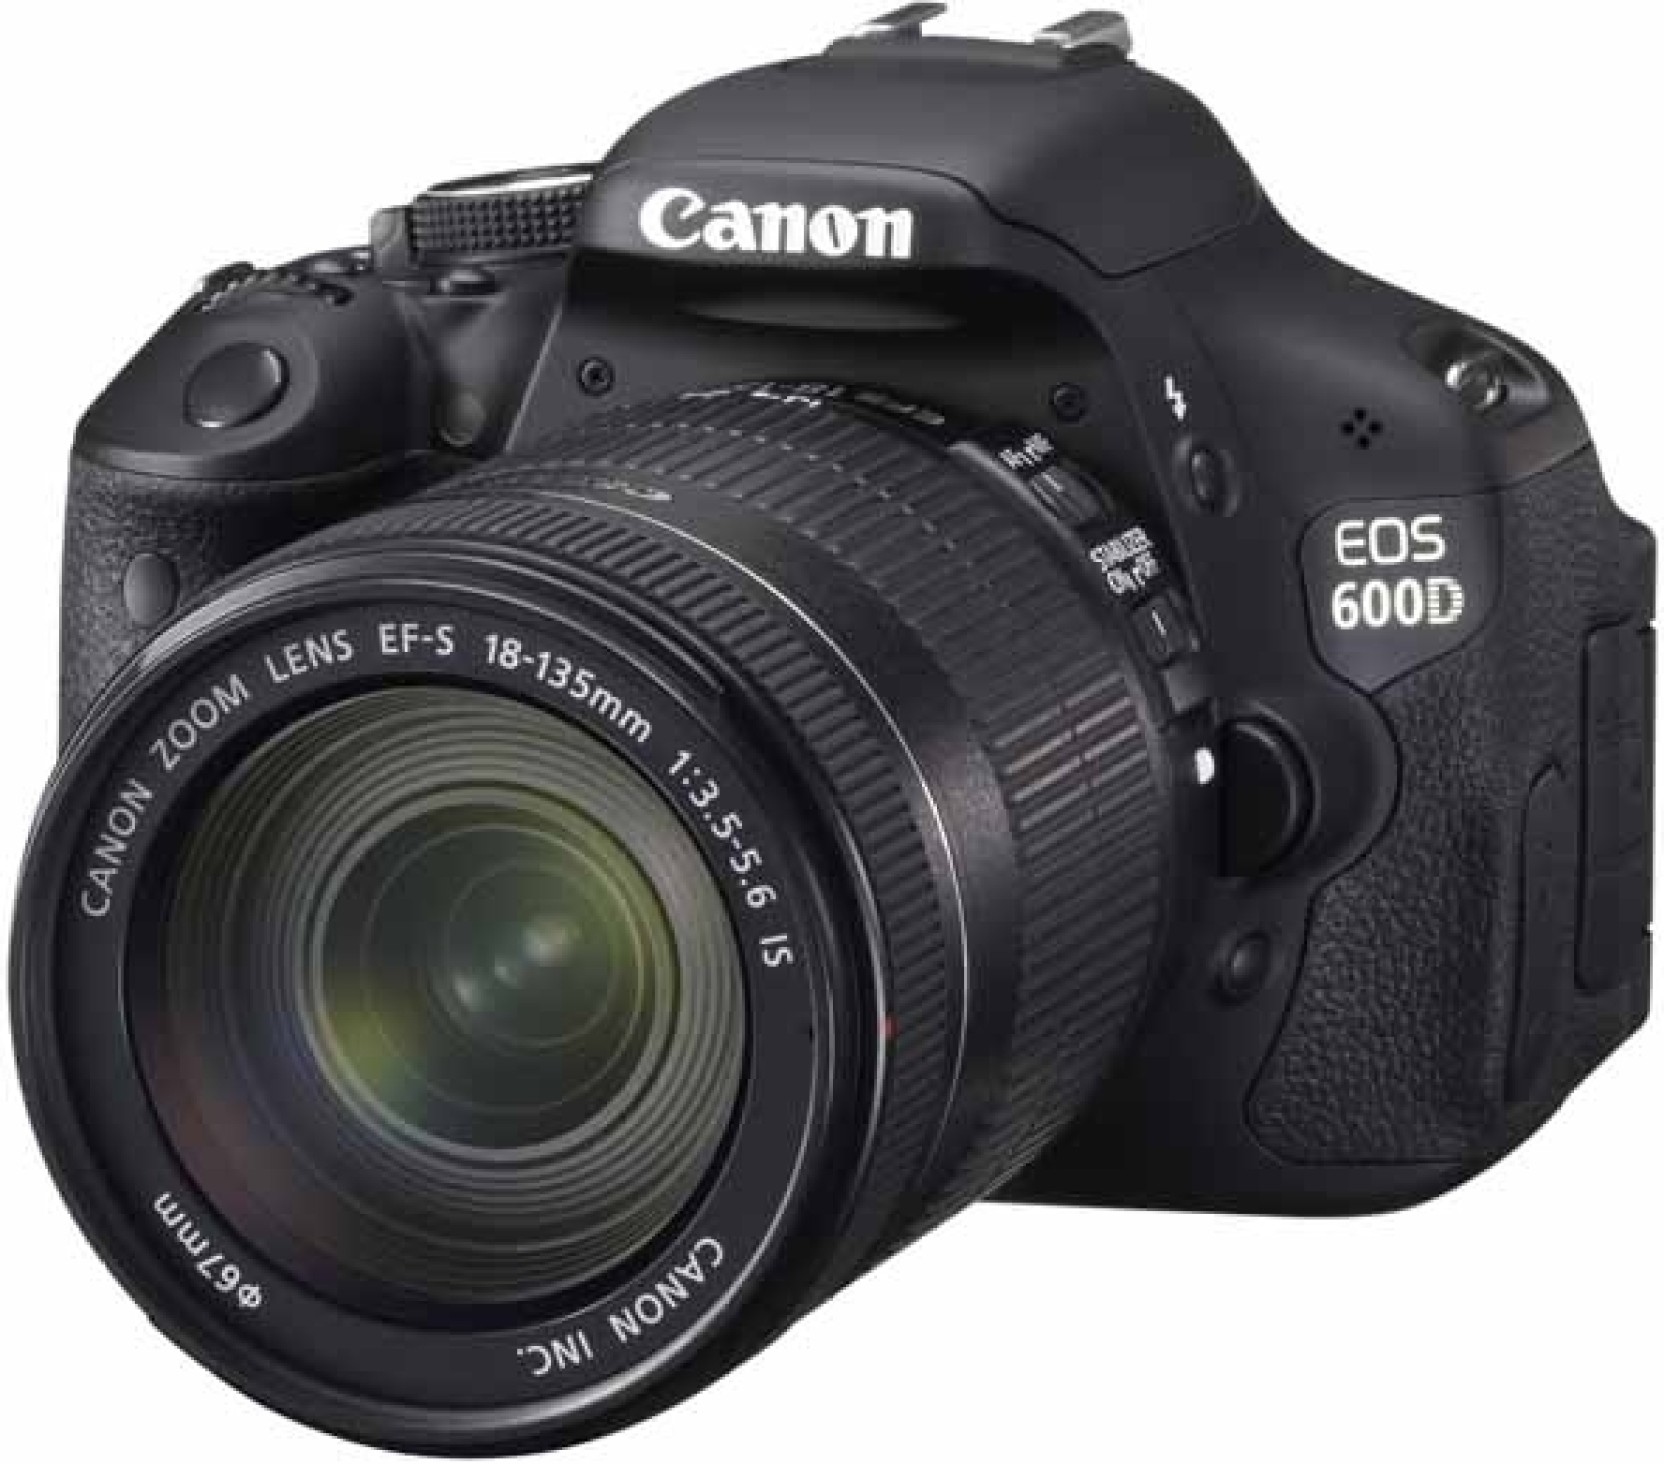 Canon EOS 600D (Body with EFS 18135 mm IS II Lens) DSLR Camera (Body